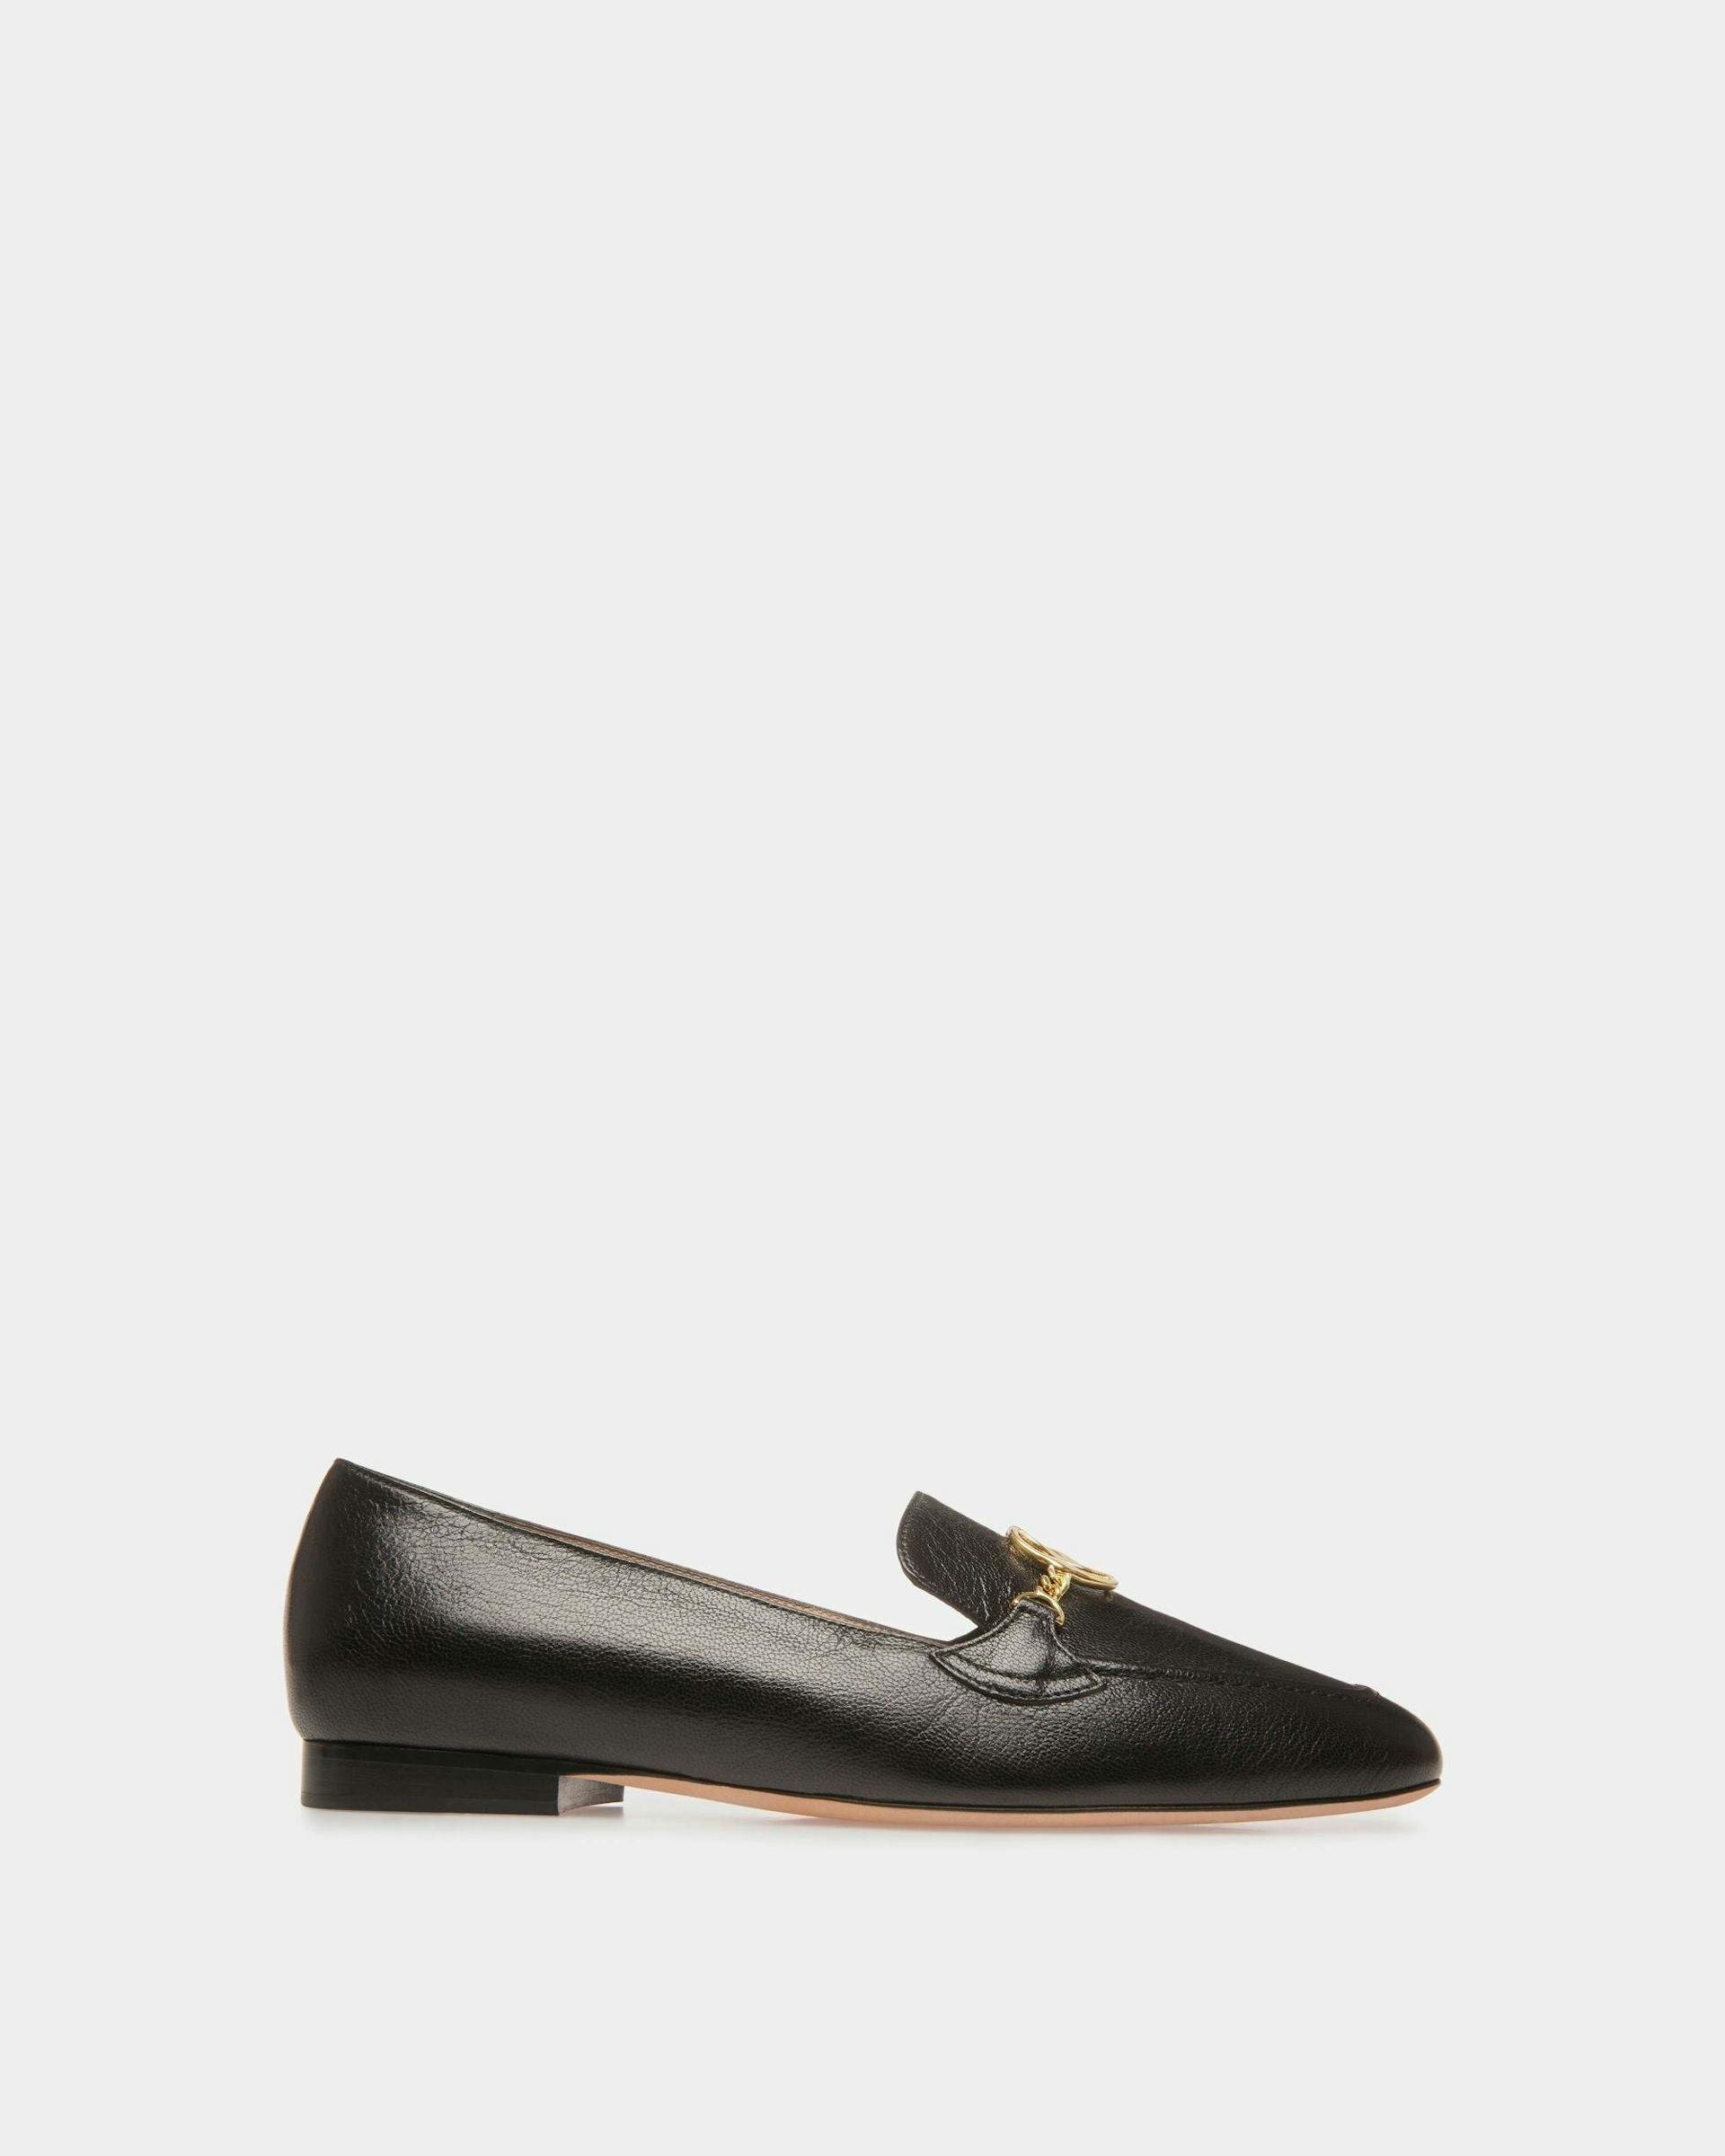 Daily Emblem Loafers - Bally